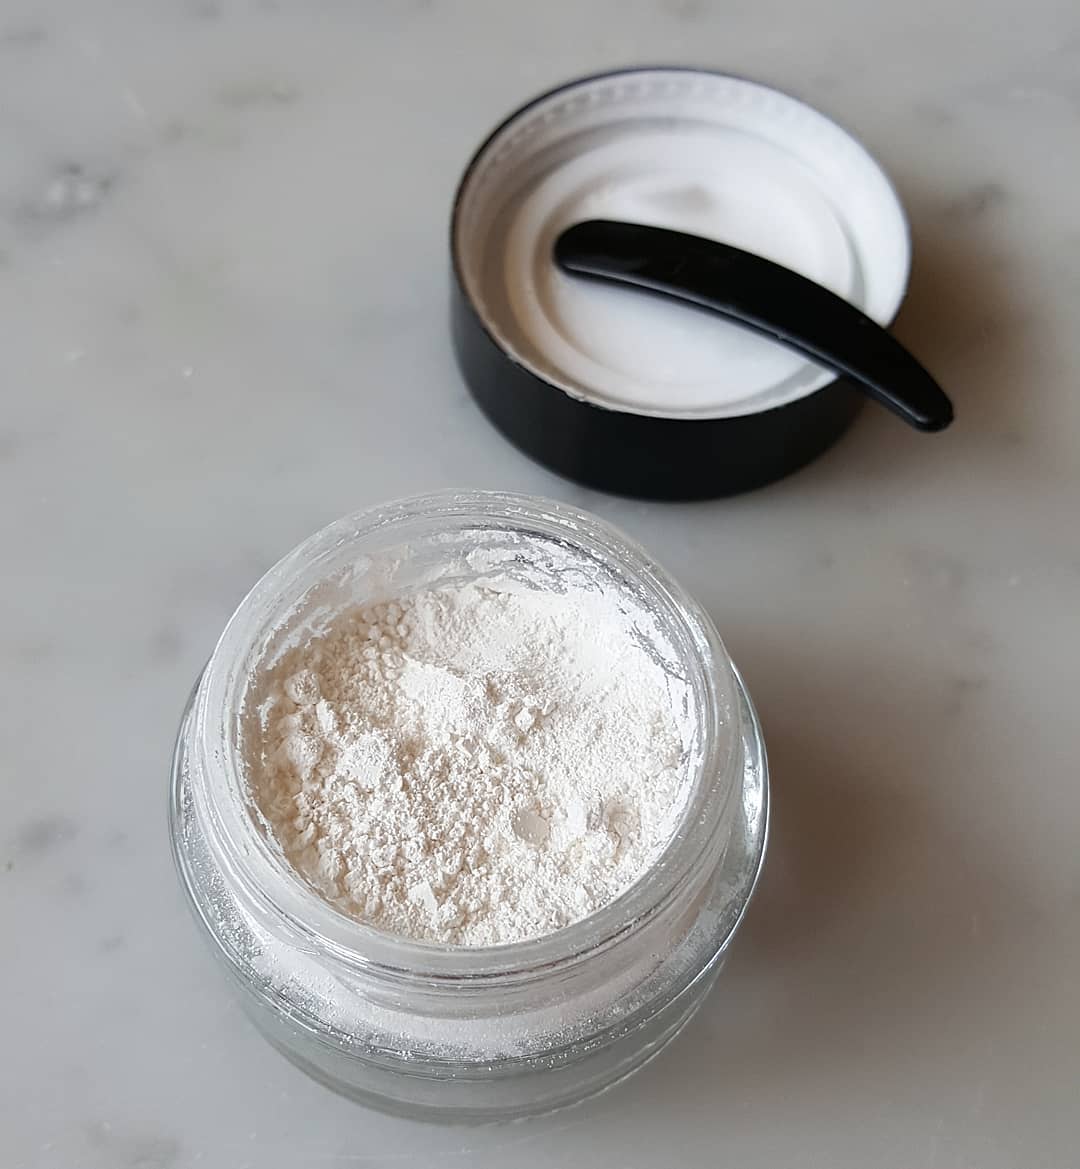 How To Pearl Powder Based On Your Skin Type